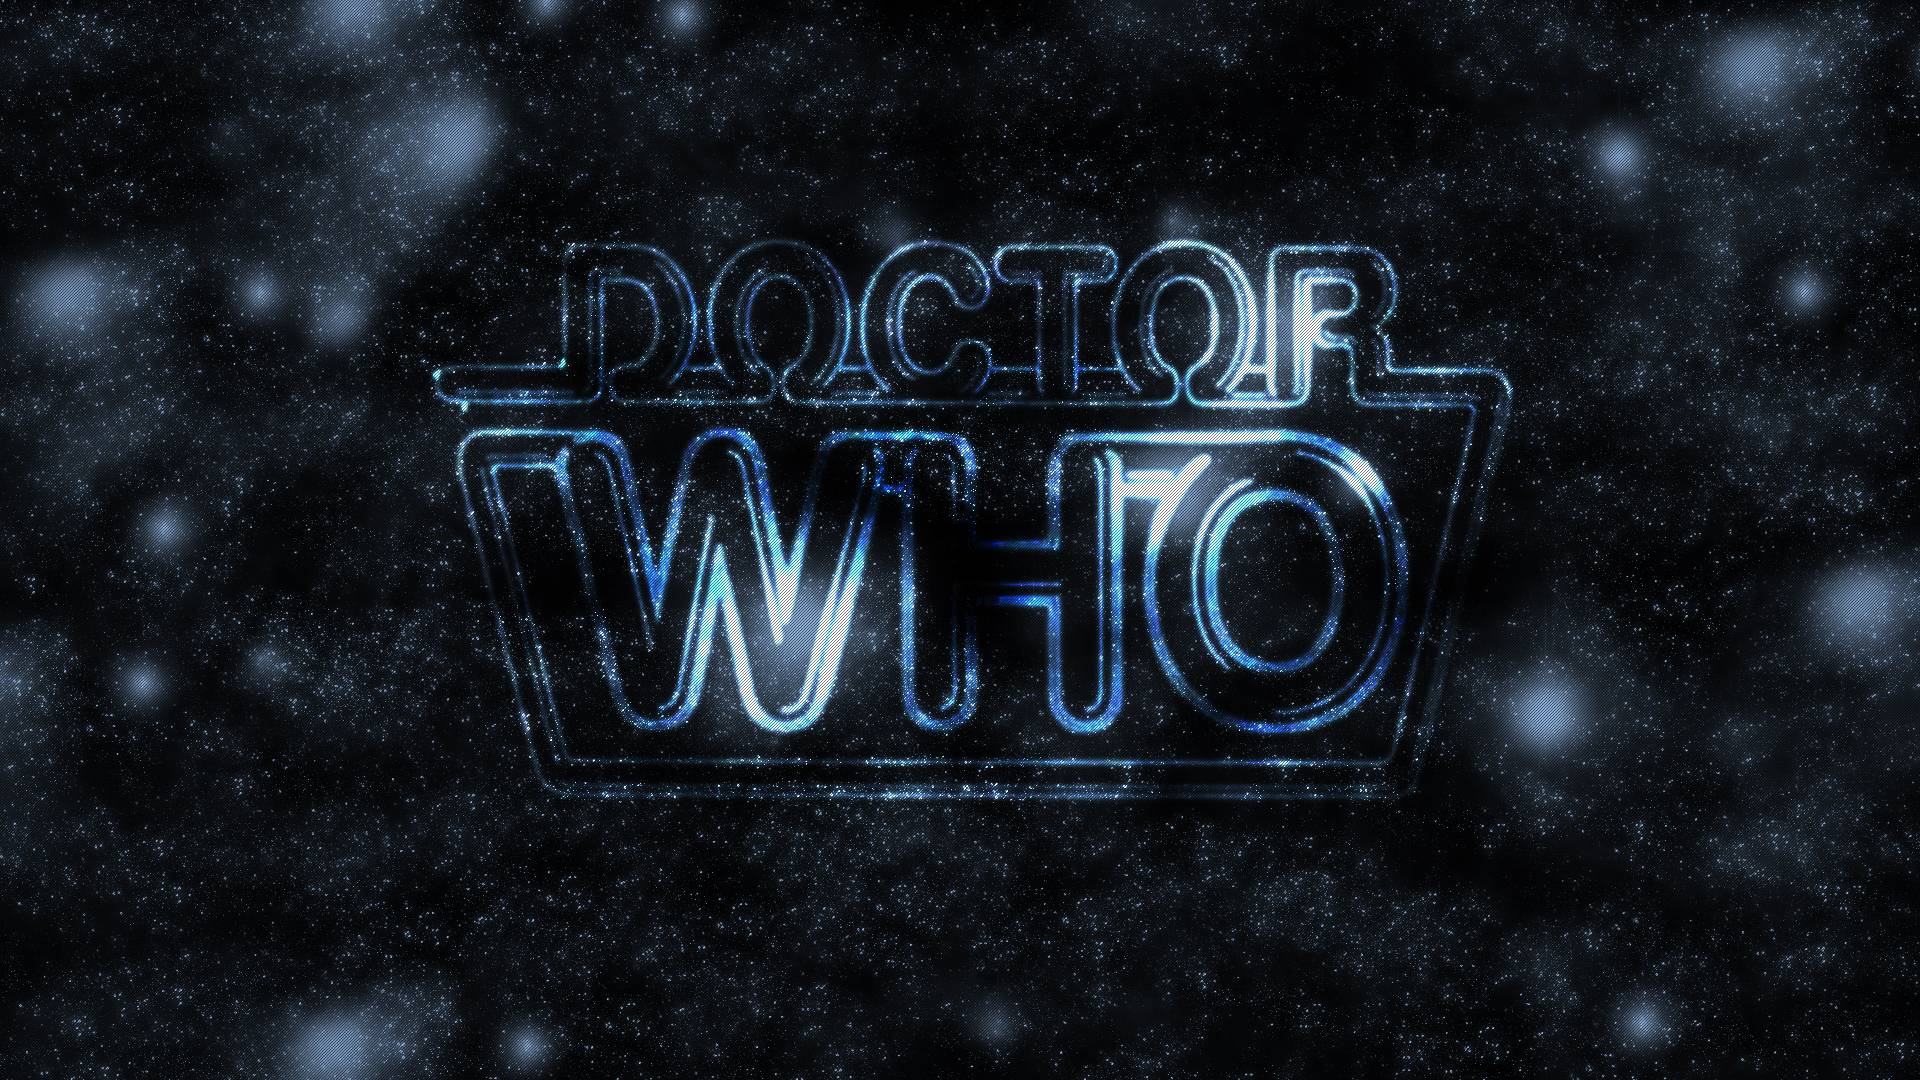 The Doctor in the Stars HD Wallpaper. Download HD Wallpaper, High